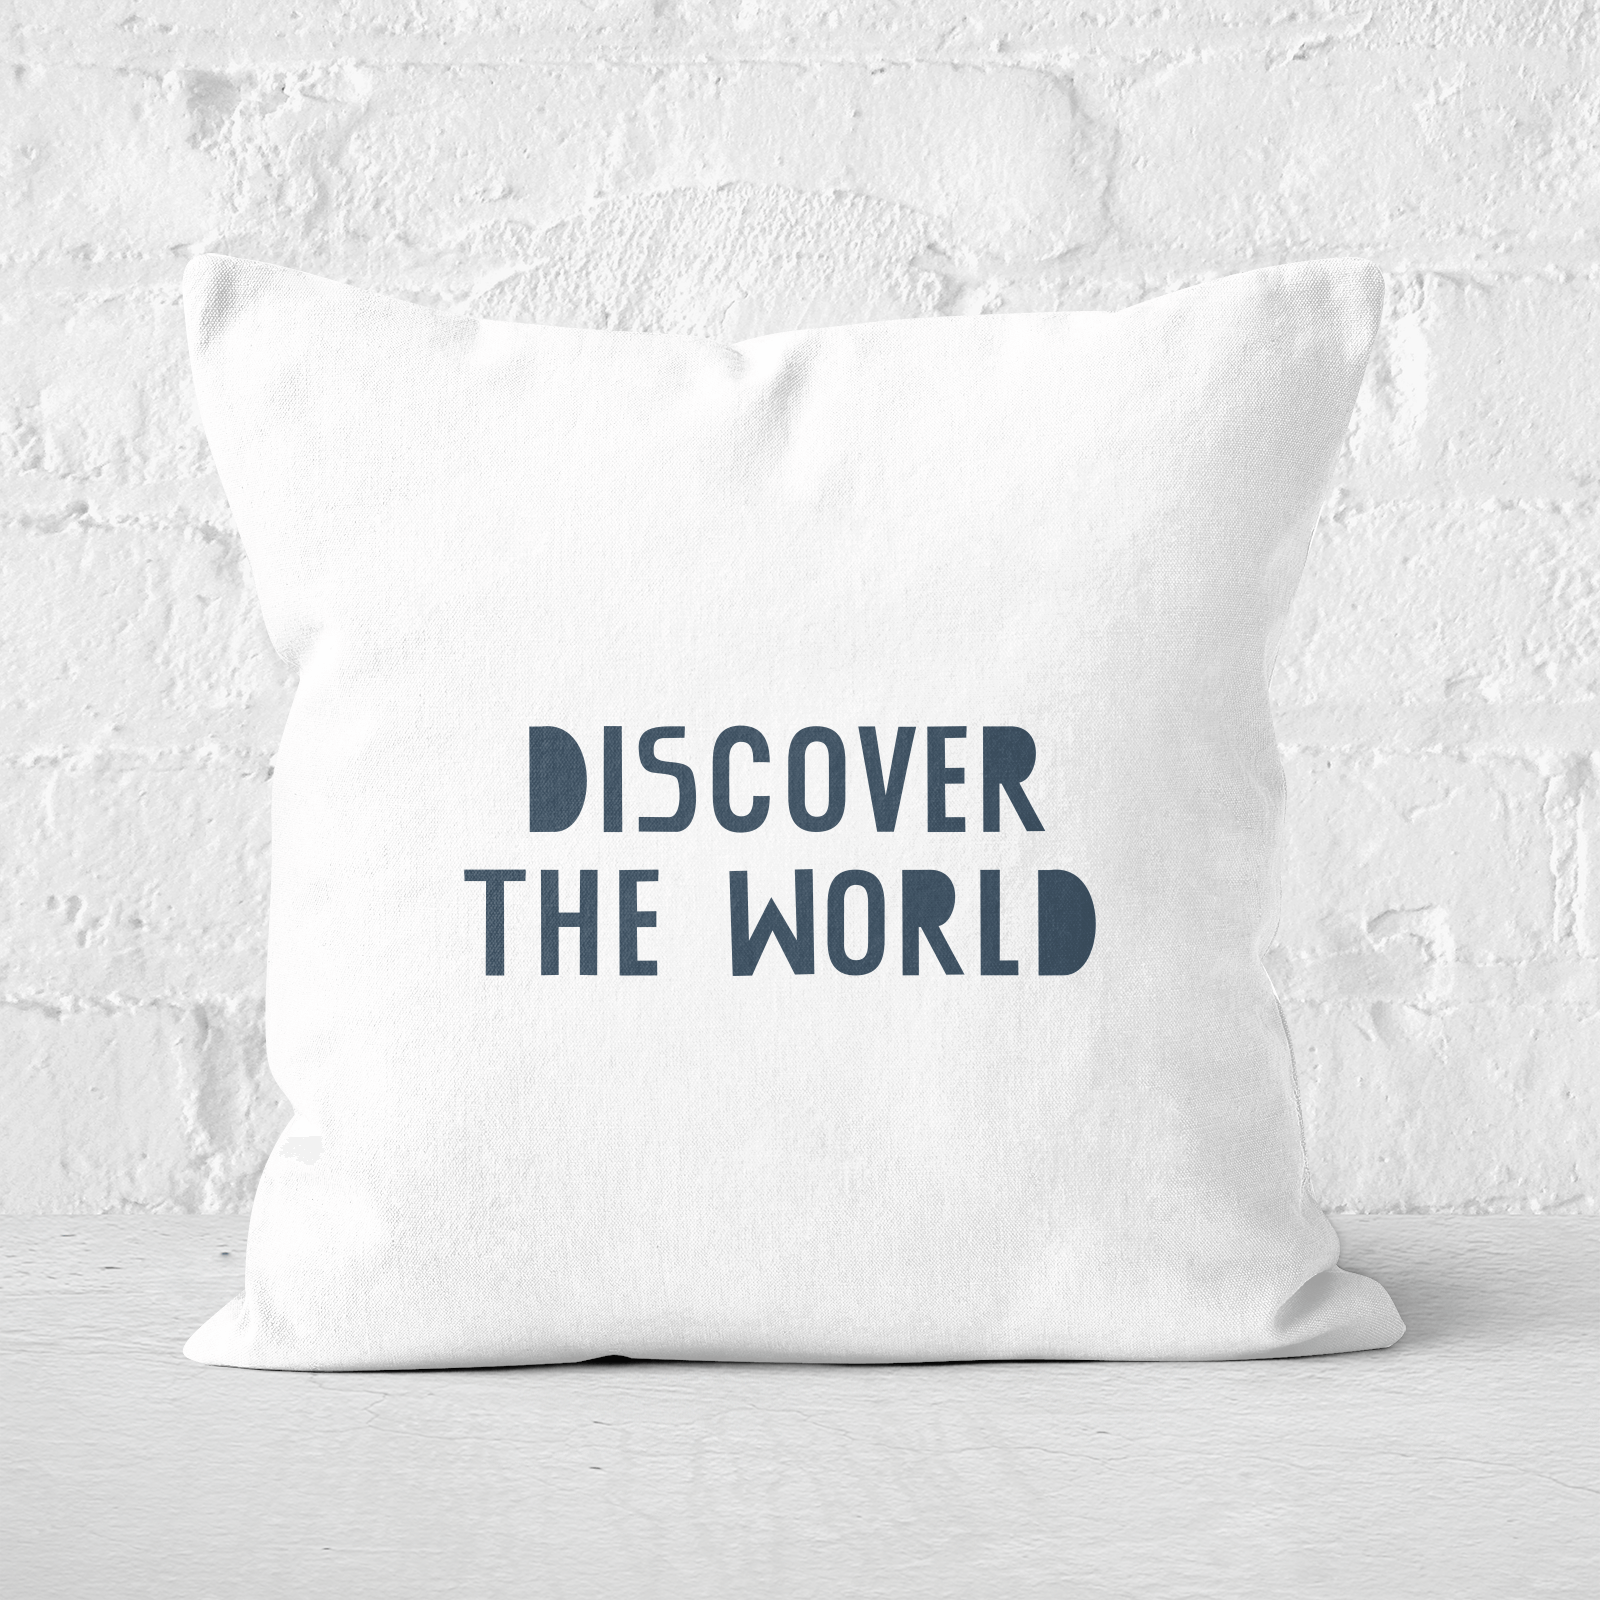 Discover The World Square Cushion - 60x60cm - Soft Touch